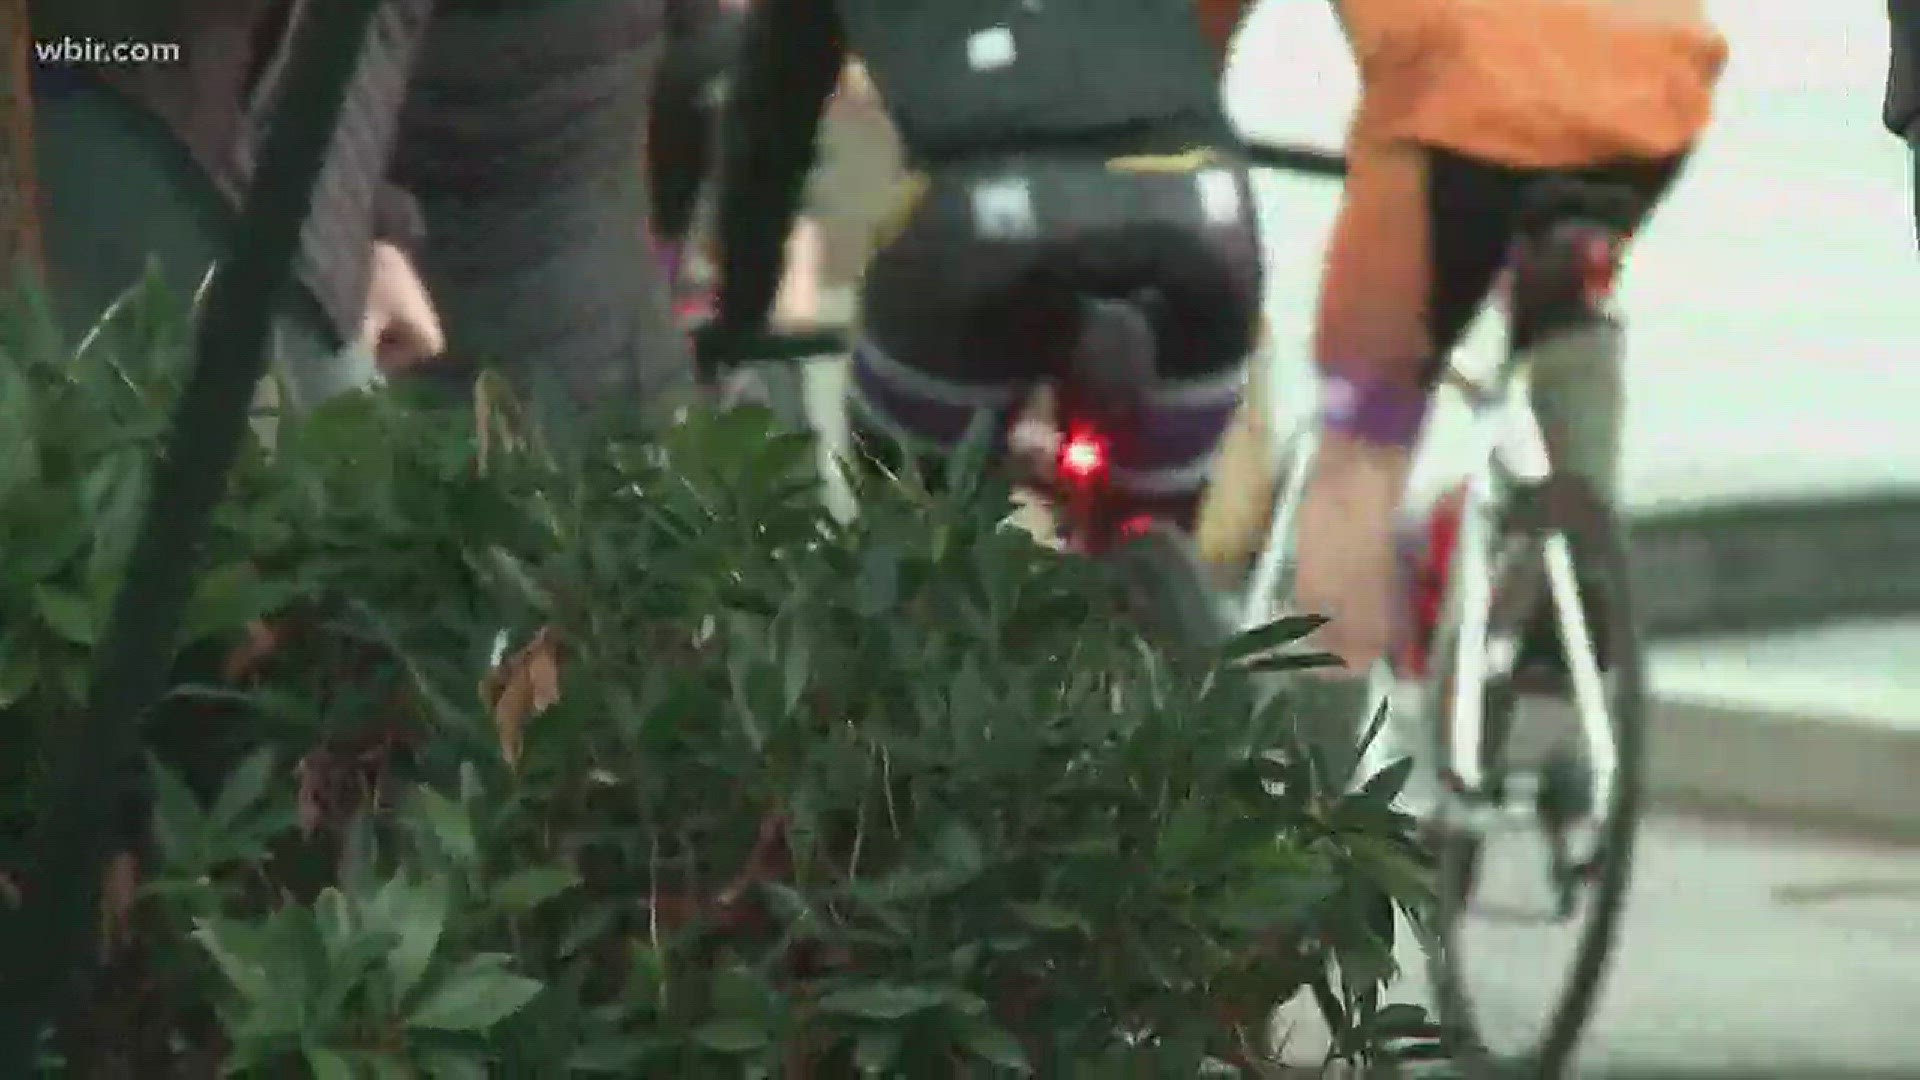 Eight bikers a riding from Knoxville to the Florida Keys in honor of Pat Summitt to raise money for Alzheimer's research.